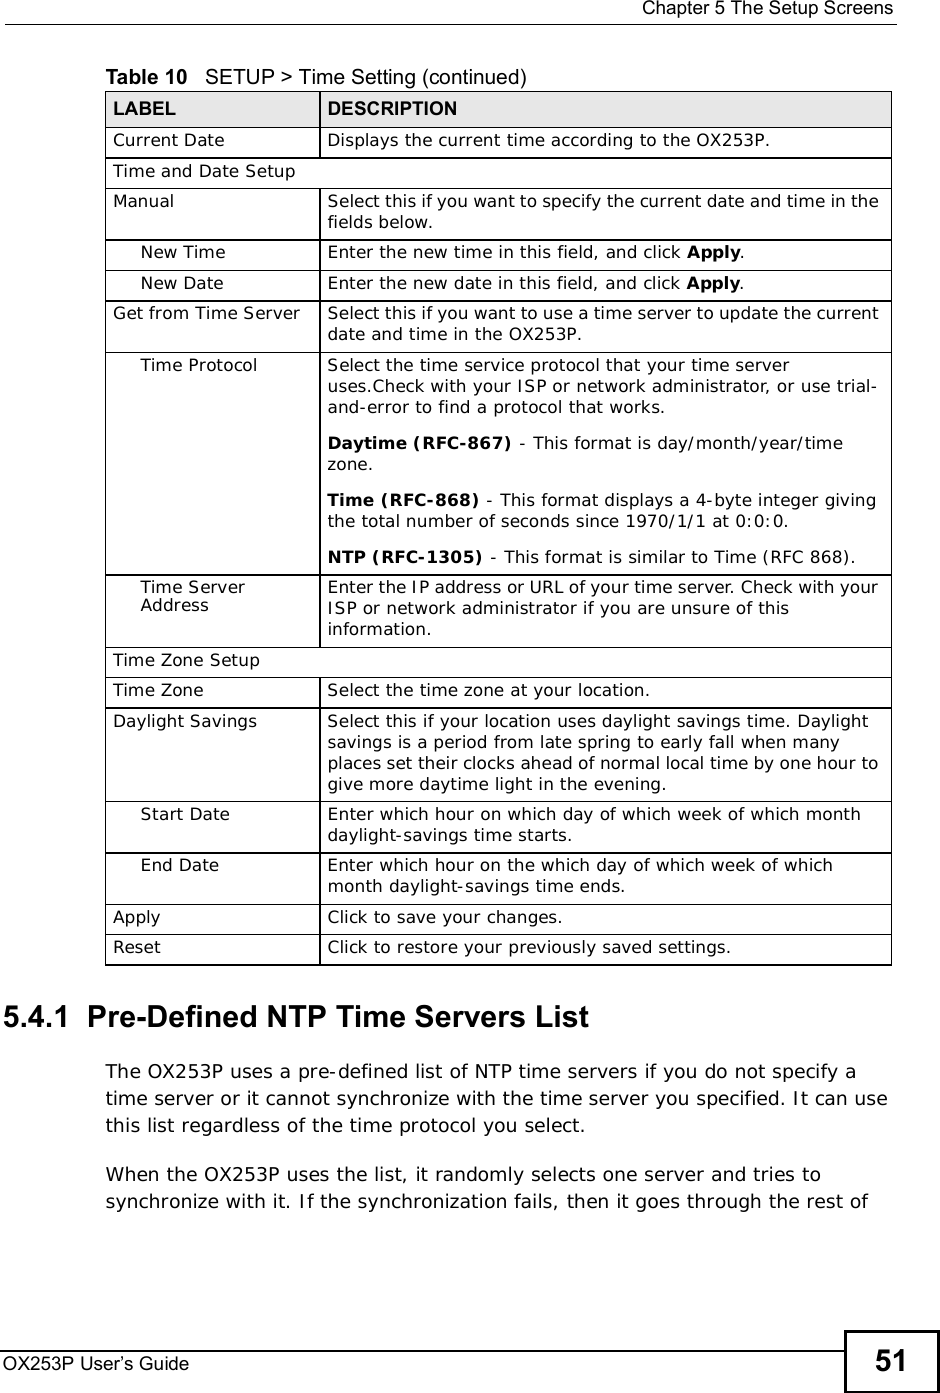  Chapter 5The Setup ScreensOX253P User’s Guide 515.4.1  Pre-Defined NTP Time Servers ListThe OX253P uses a pre-defined list of NTP time servers if you do not specify a time server or it cannot synchronize with the time server you specified. It can use this list regardless of the time protocol you select.When the OX253P uses the list, it randomly selects one server and tries to synchronize with it. If the synchronization fails, then it goes through the rest of Current DateDisplays the current time according to the OX253P.Time and Date SetupManual Select this if you want to specify the current date and time in the fields below.New Time Enter the new time in this field, and click Apply.New Date Enter the new date in this field, and click Apply.Get from Time Server Select this if you want to use a time server to update the current date and time in the OX253P.Time ProtocolSelect the time service protocol that your time server uses.Check with your ISP or network administrator, or use trial-and-error to find a protocol that works.Daytime (RFC-867) - This format is day/month/year/time zone.Time (RFC-868) - This format displays a 4-byte integer giving the total number of seconds since 1970/1/1 at 0:0:0.NTP (RFC-1305) - This format is similar to Time (RFC 868).Time Server Address Enter the IP address or URL of your time server. Check with your ISP or network administrator if you are unsure of this information.Time Zone SetupTime ZoneSelect the time zone at your location.Daylight SavingsSelect this if your location uses daylight savings time. Daylight savings is a period from late spring to early fall when many places set their clocks ahead of normal local time by one hour to give more daytime light in the evening.Start DateEnter which hour on which day of which week of which month daylight-savings time starts.End DateEnter which hour on the which day of which week of which month daylight-savings time ends.Apply Click to save your changes.Reset Click to restore your previously saved settings.Table 10   SETUP &gt; Time Setting (continued)LABEL DESCRIPTION